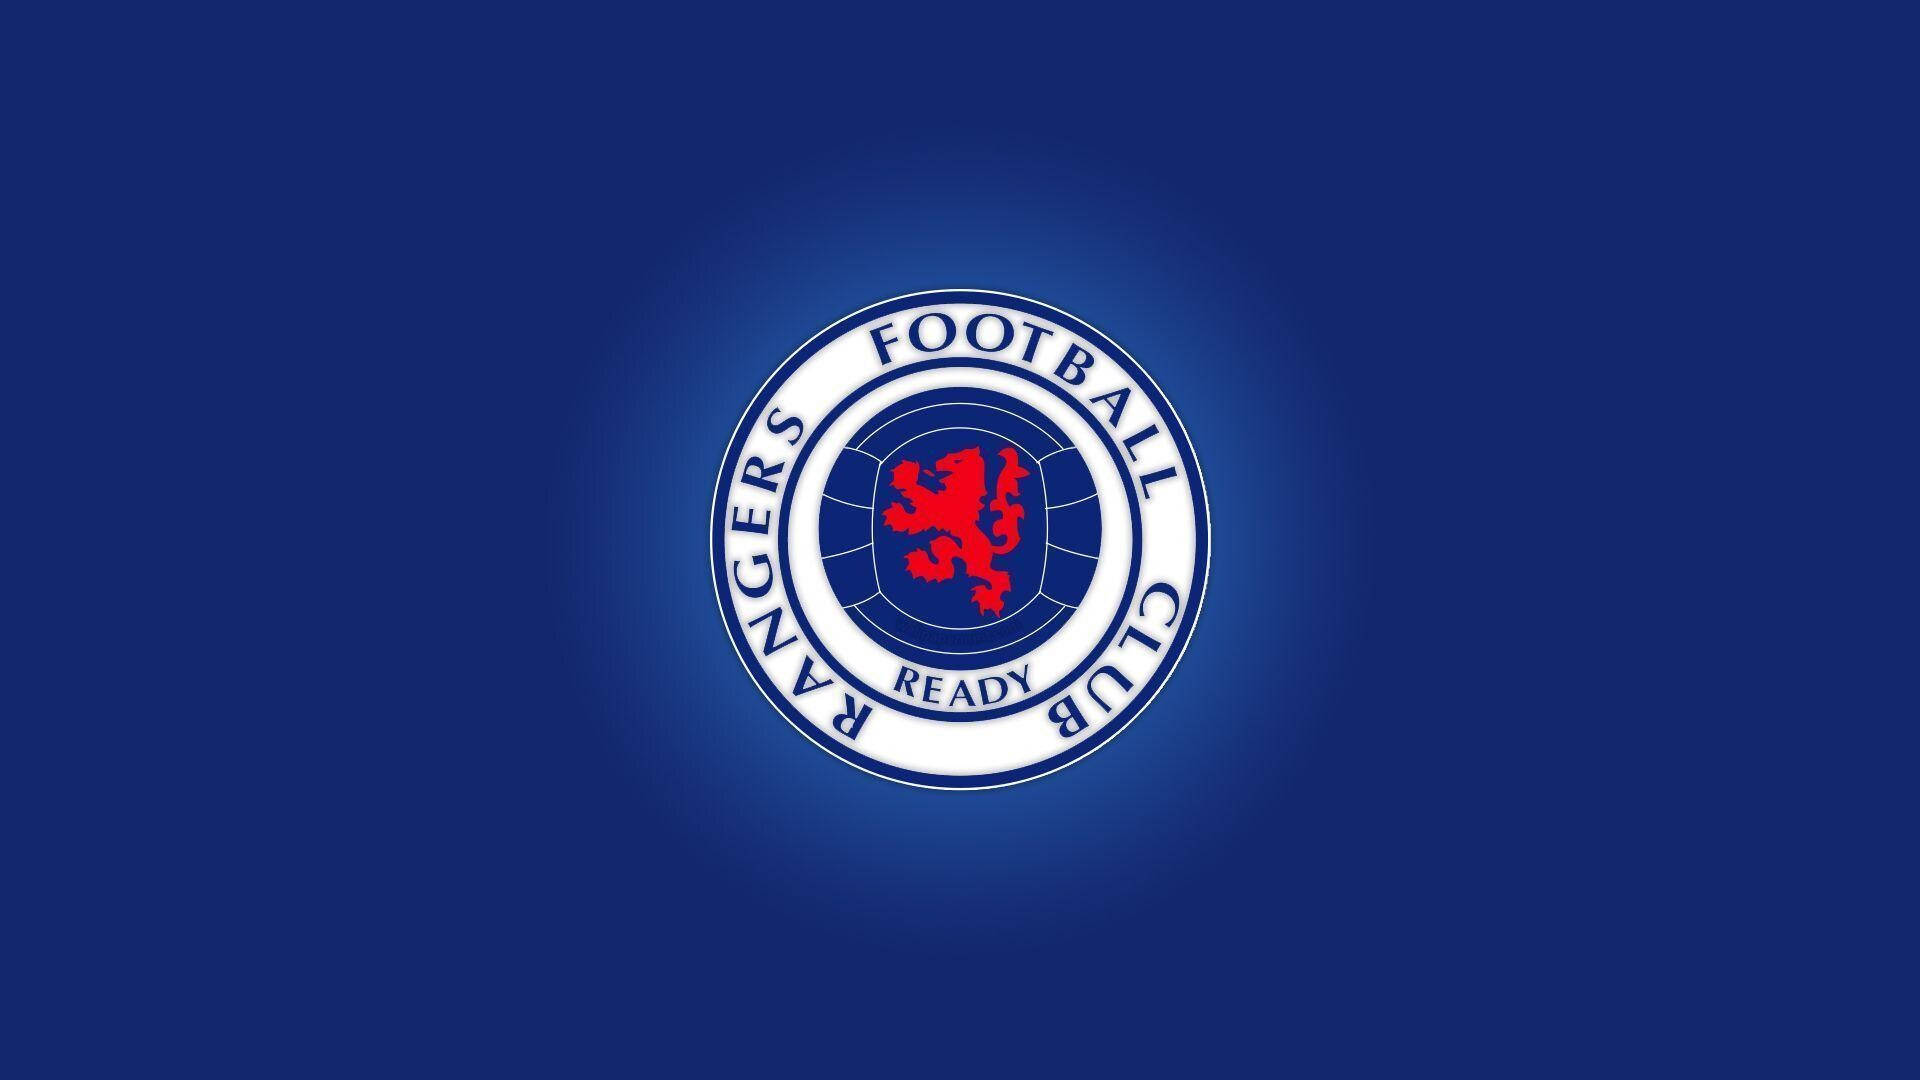 Rangers F.C.: The most successful club in Scottish football, The Scottish Premiership. 1920x1080 Full HD Background.